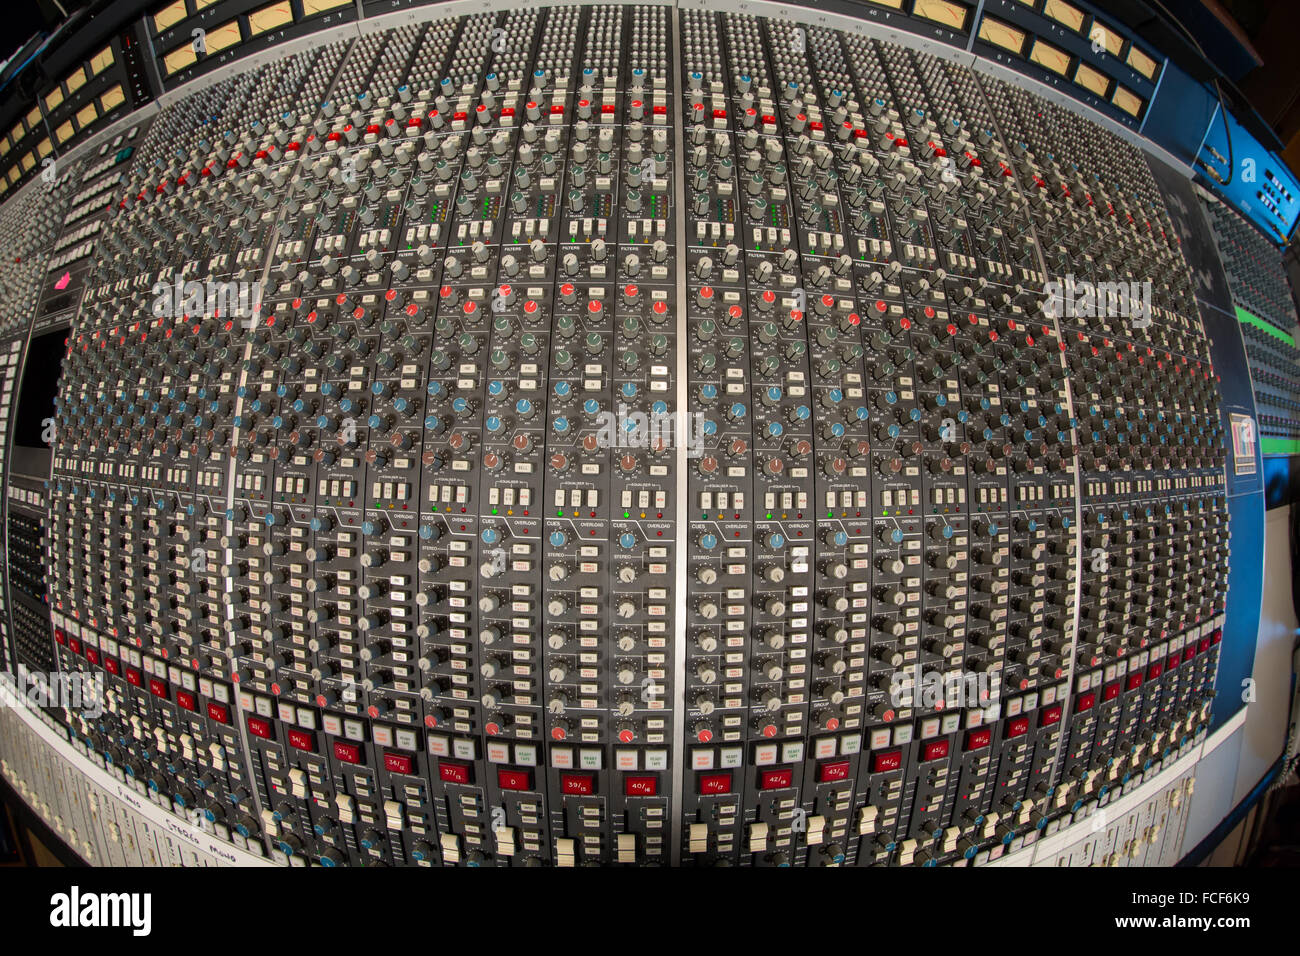 above fish eye view of ssl e series sound mixing desk showing buttons, knobs, controlls and faders Stock Photo